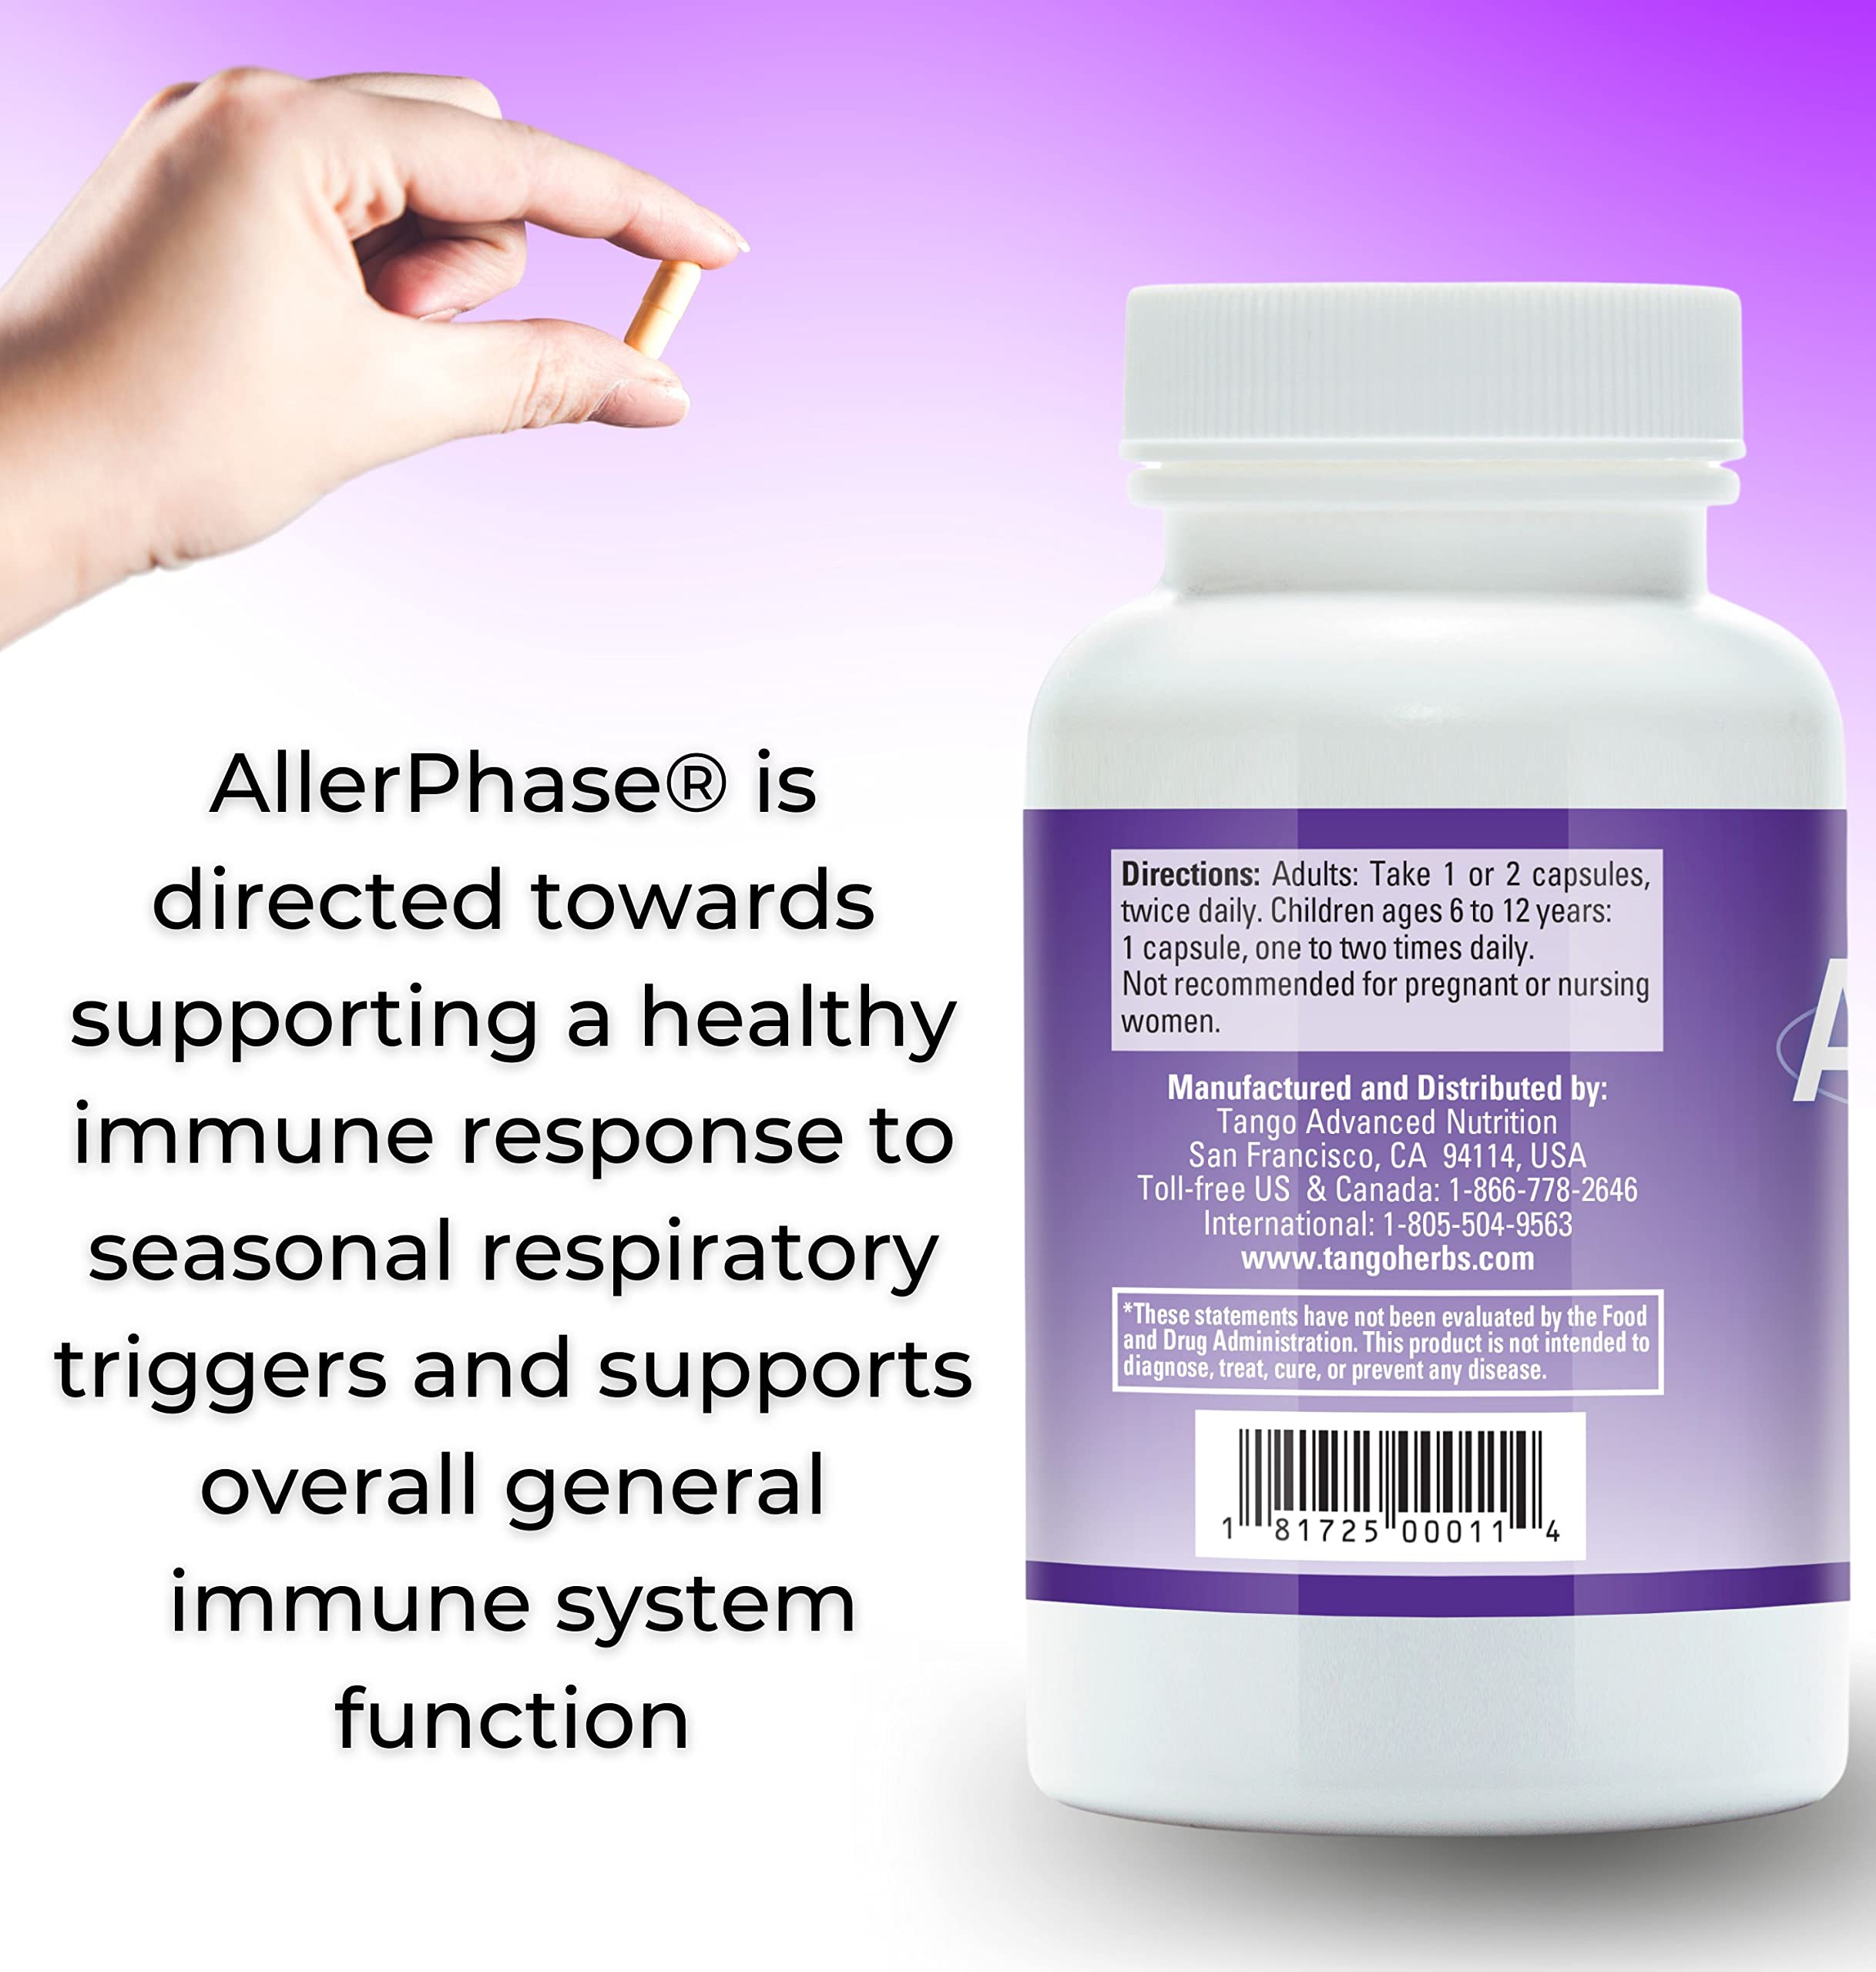 AllerPhase Natural Herbal Sinus and Lung Relief Supplement and ImmunoPhase Natural Herbal Immune Support Supplement